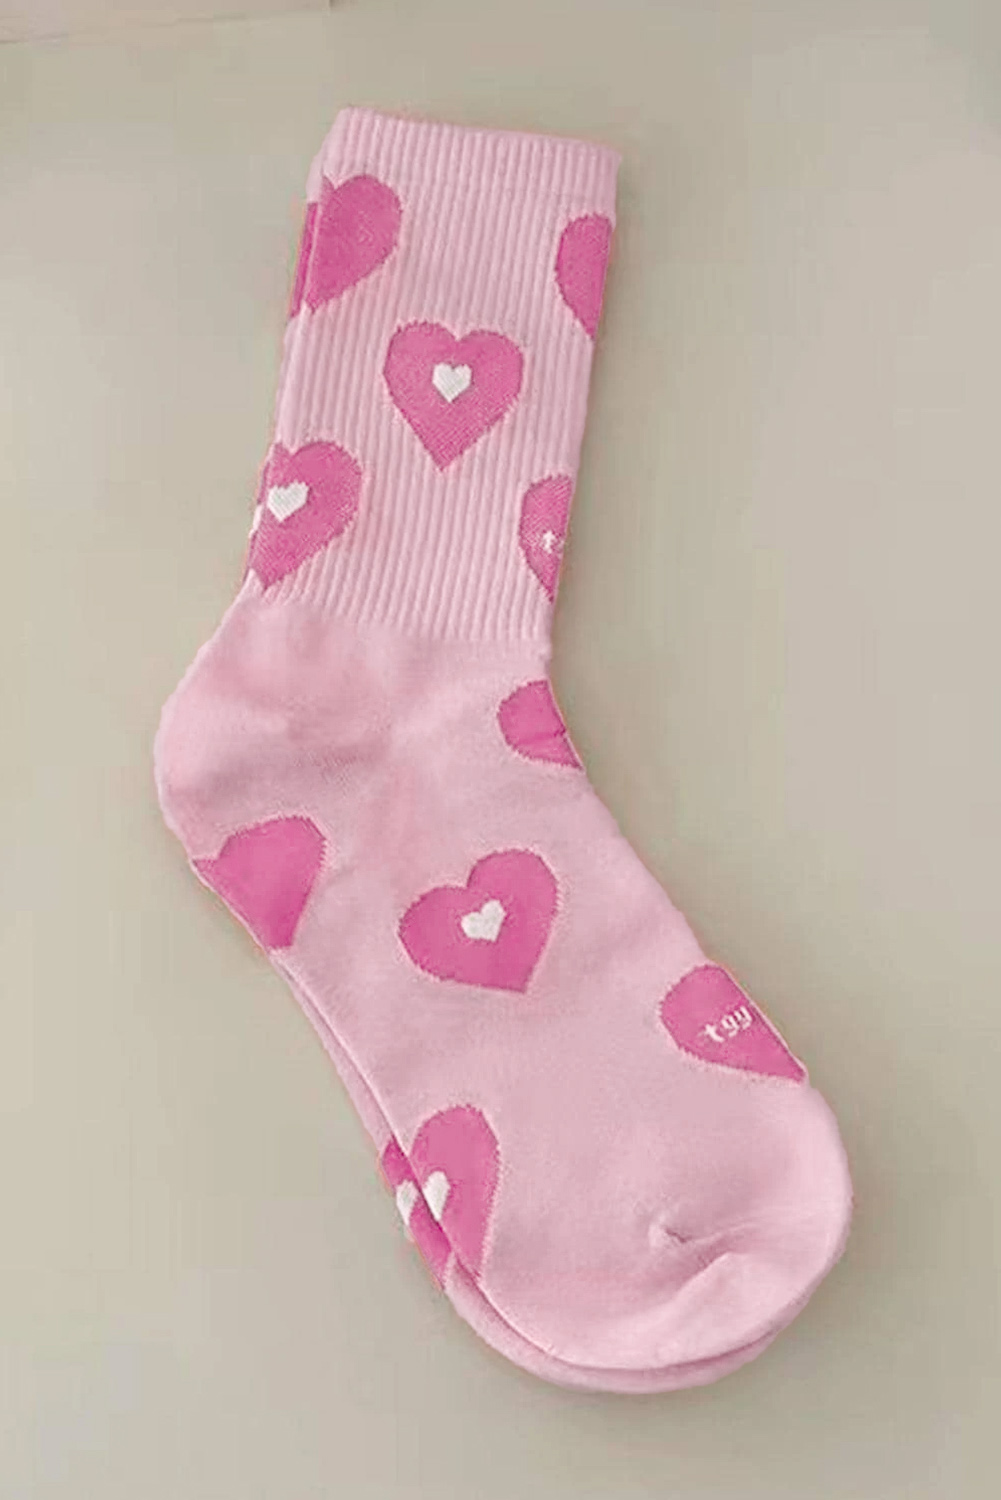  Pink Textured Sweetheart Print High Ankle SOCKS